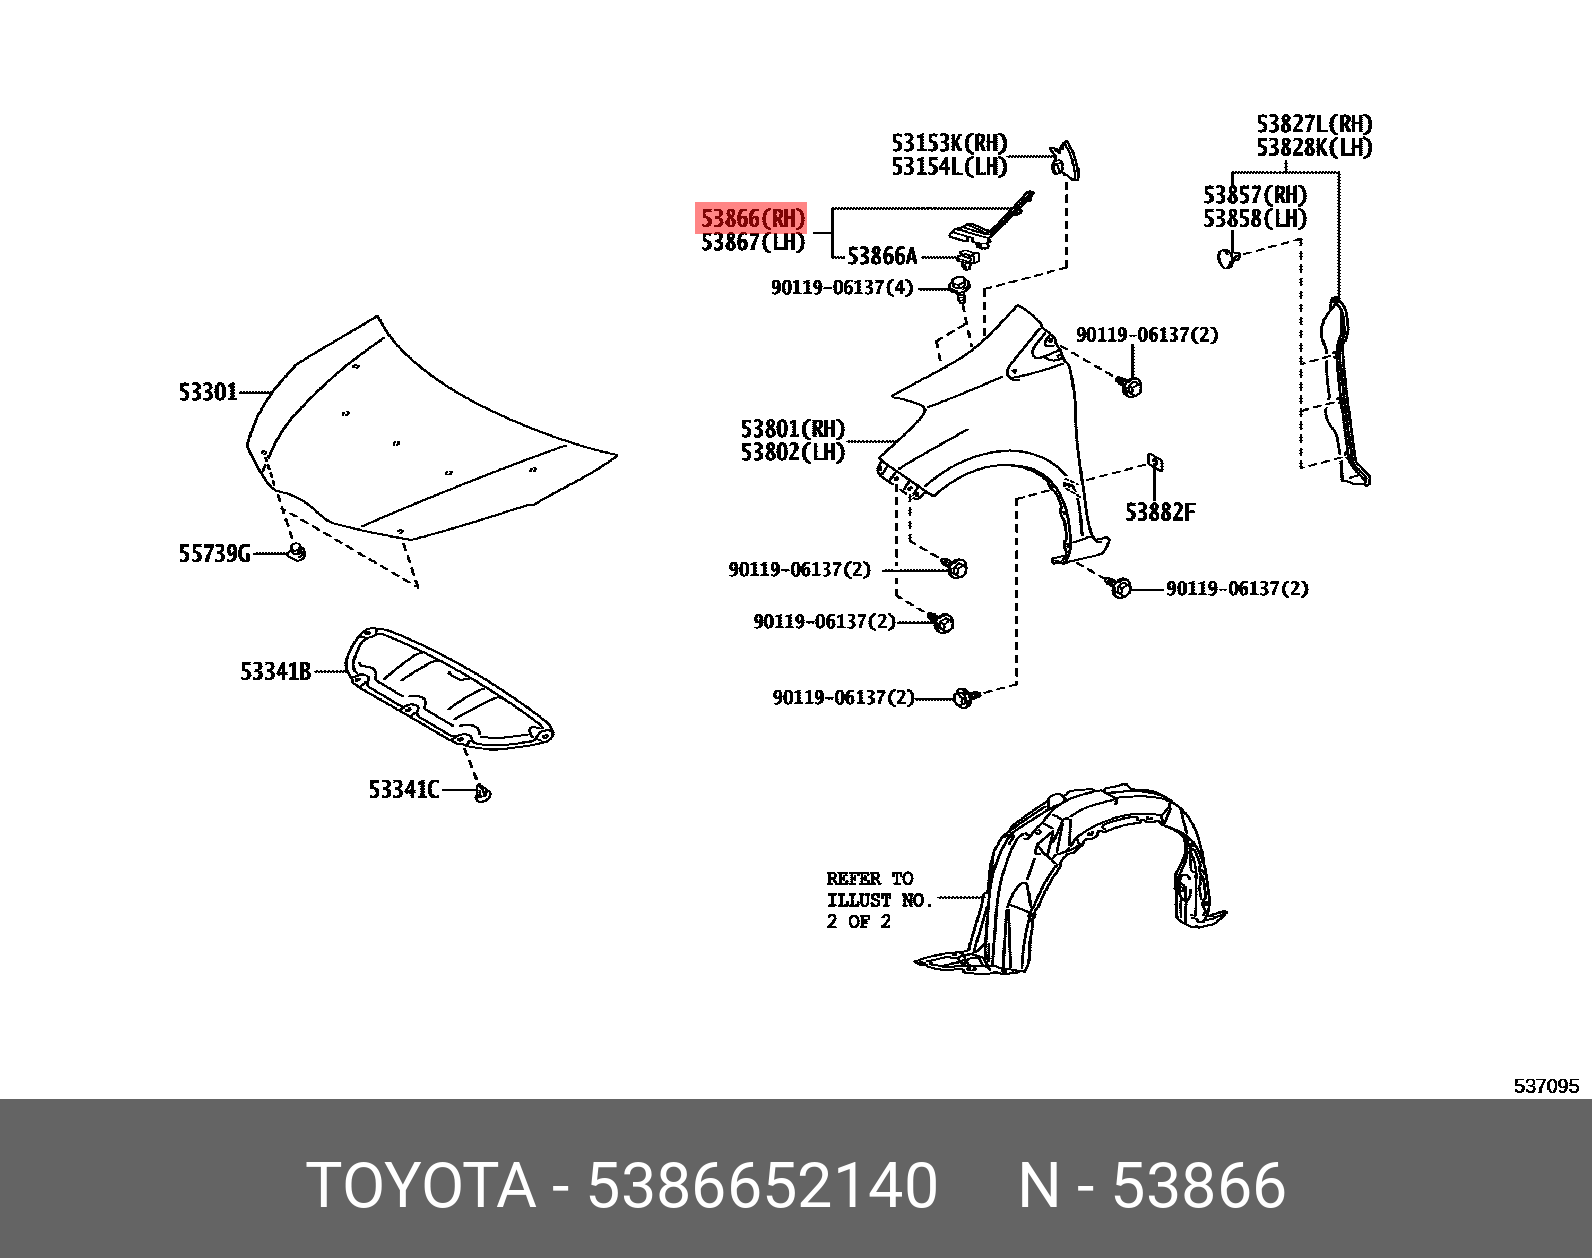 VITZ 201012 -, SEAL, FRONT FENDER TO COWL SIDE, RH